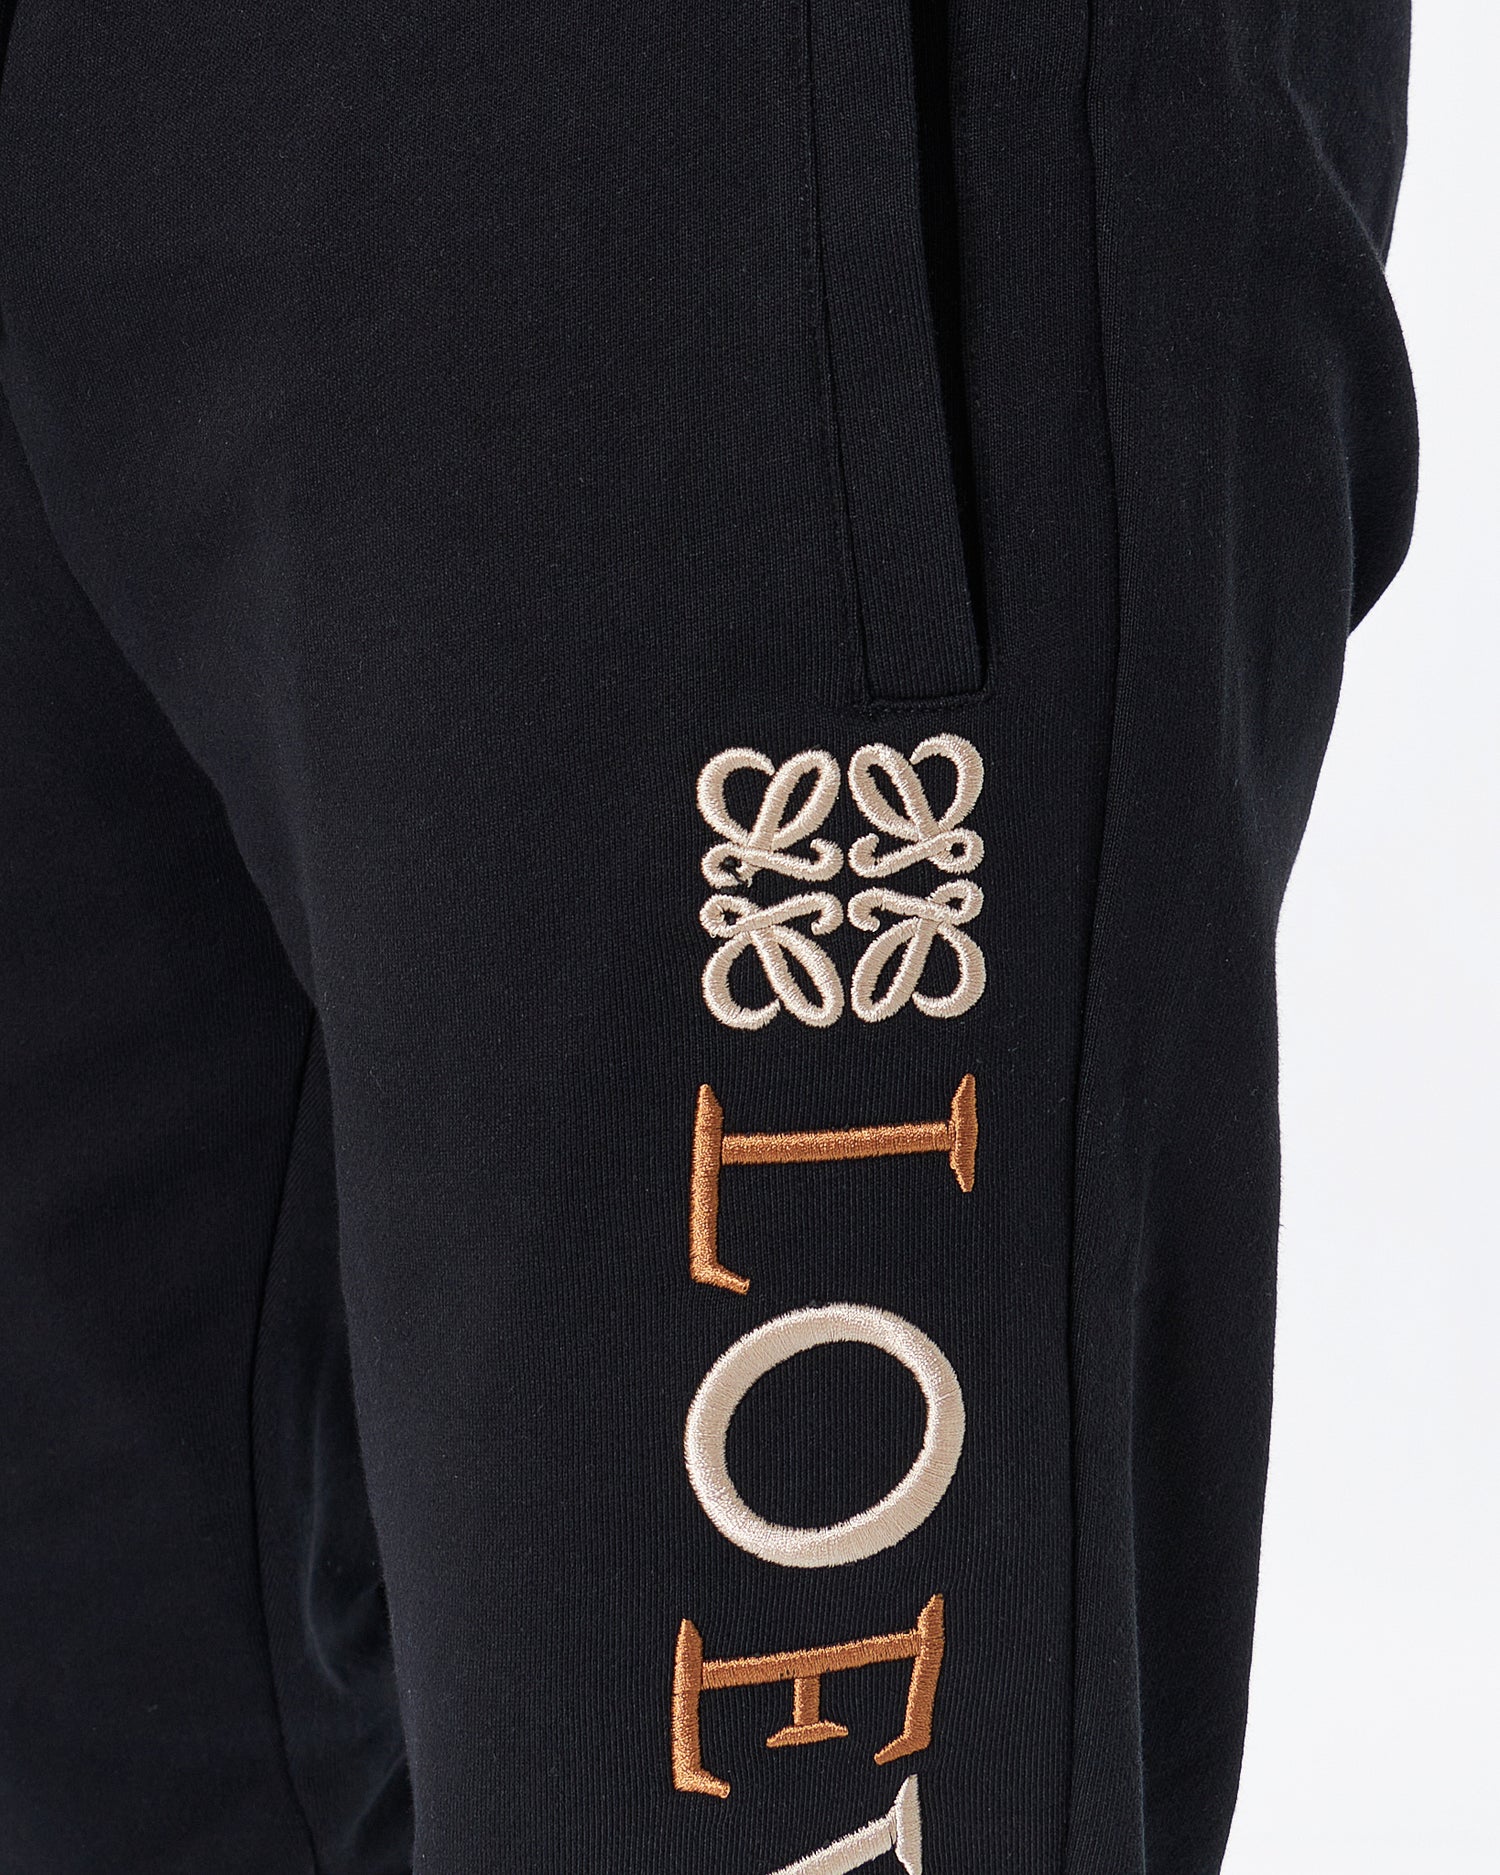 LOW Logo Embroidered Vertical Men Black Joggers 29.90